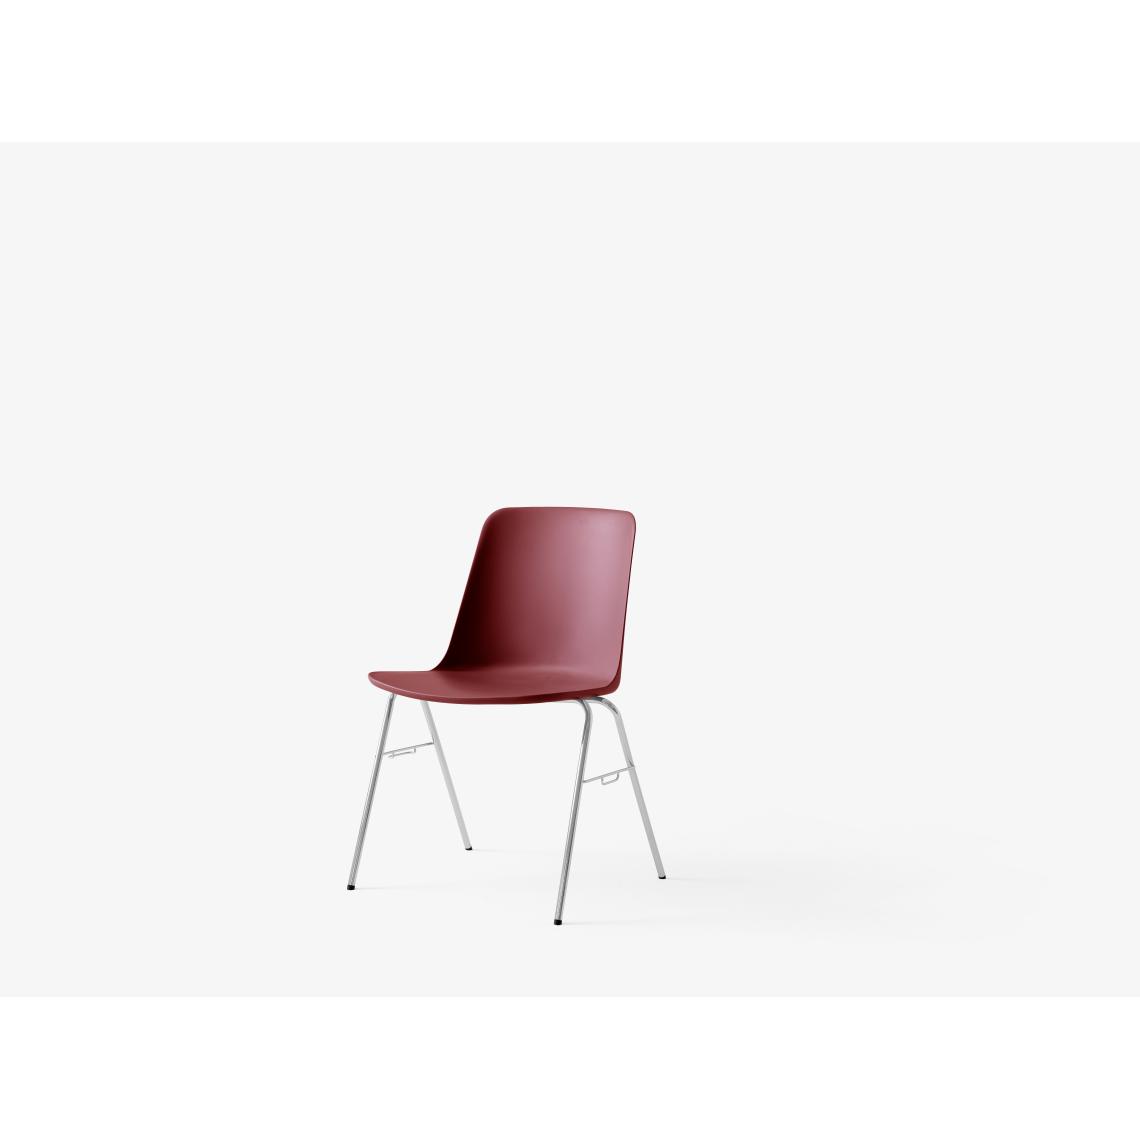 Andtradition - Chaise HW 27 - rouge/marron - Chaises